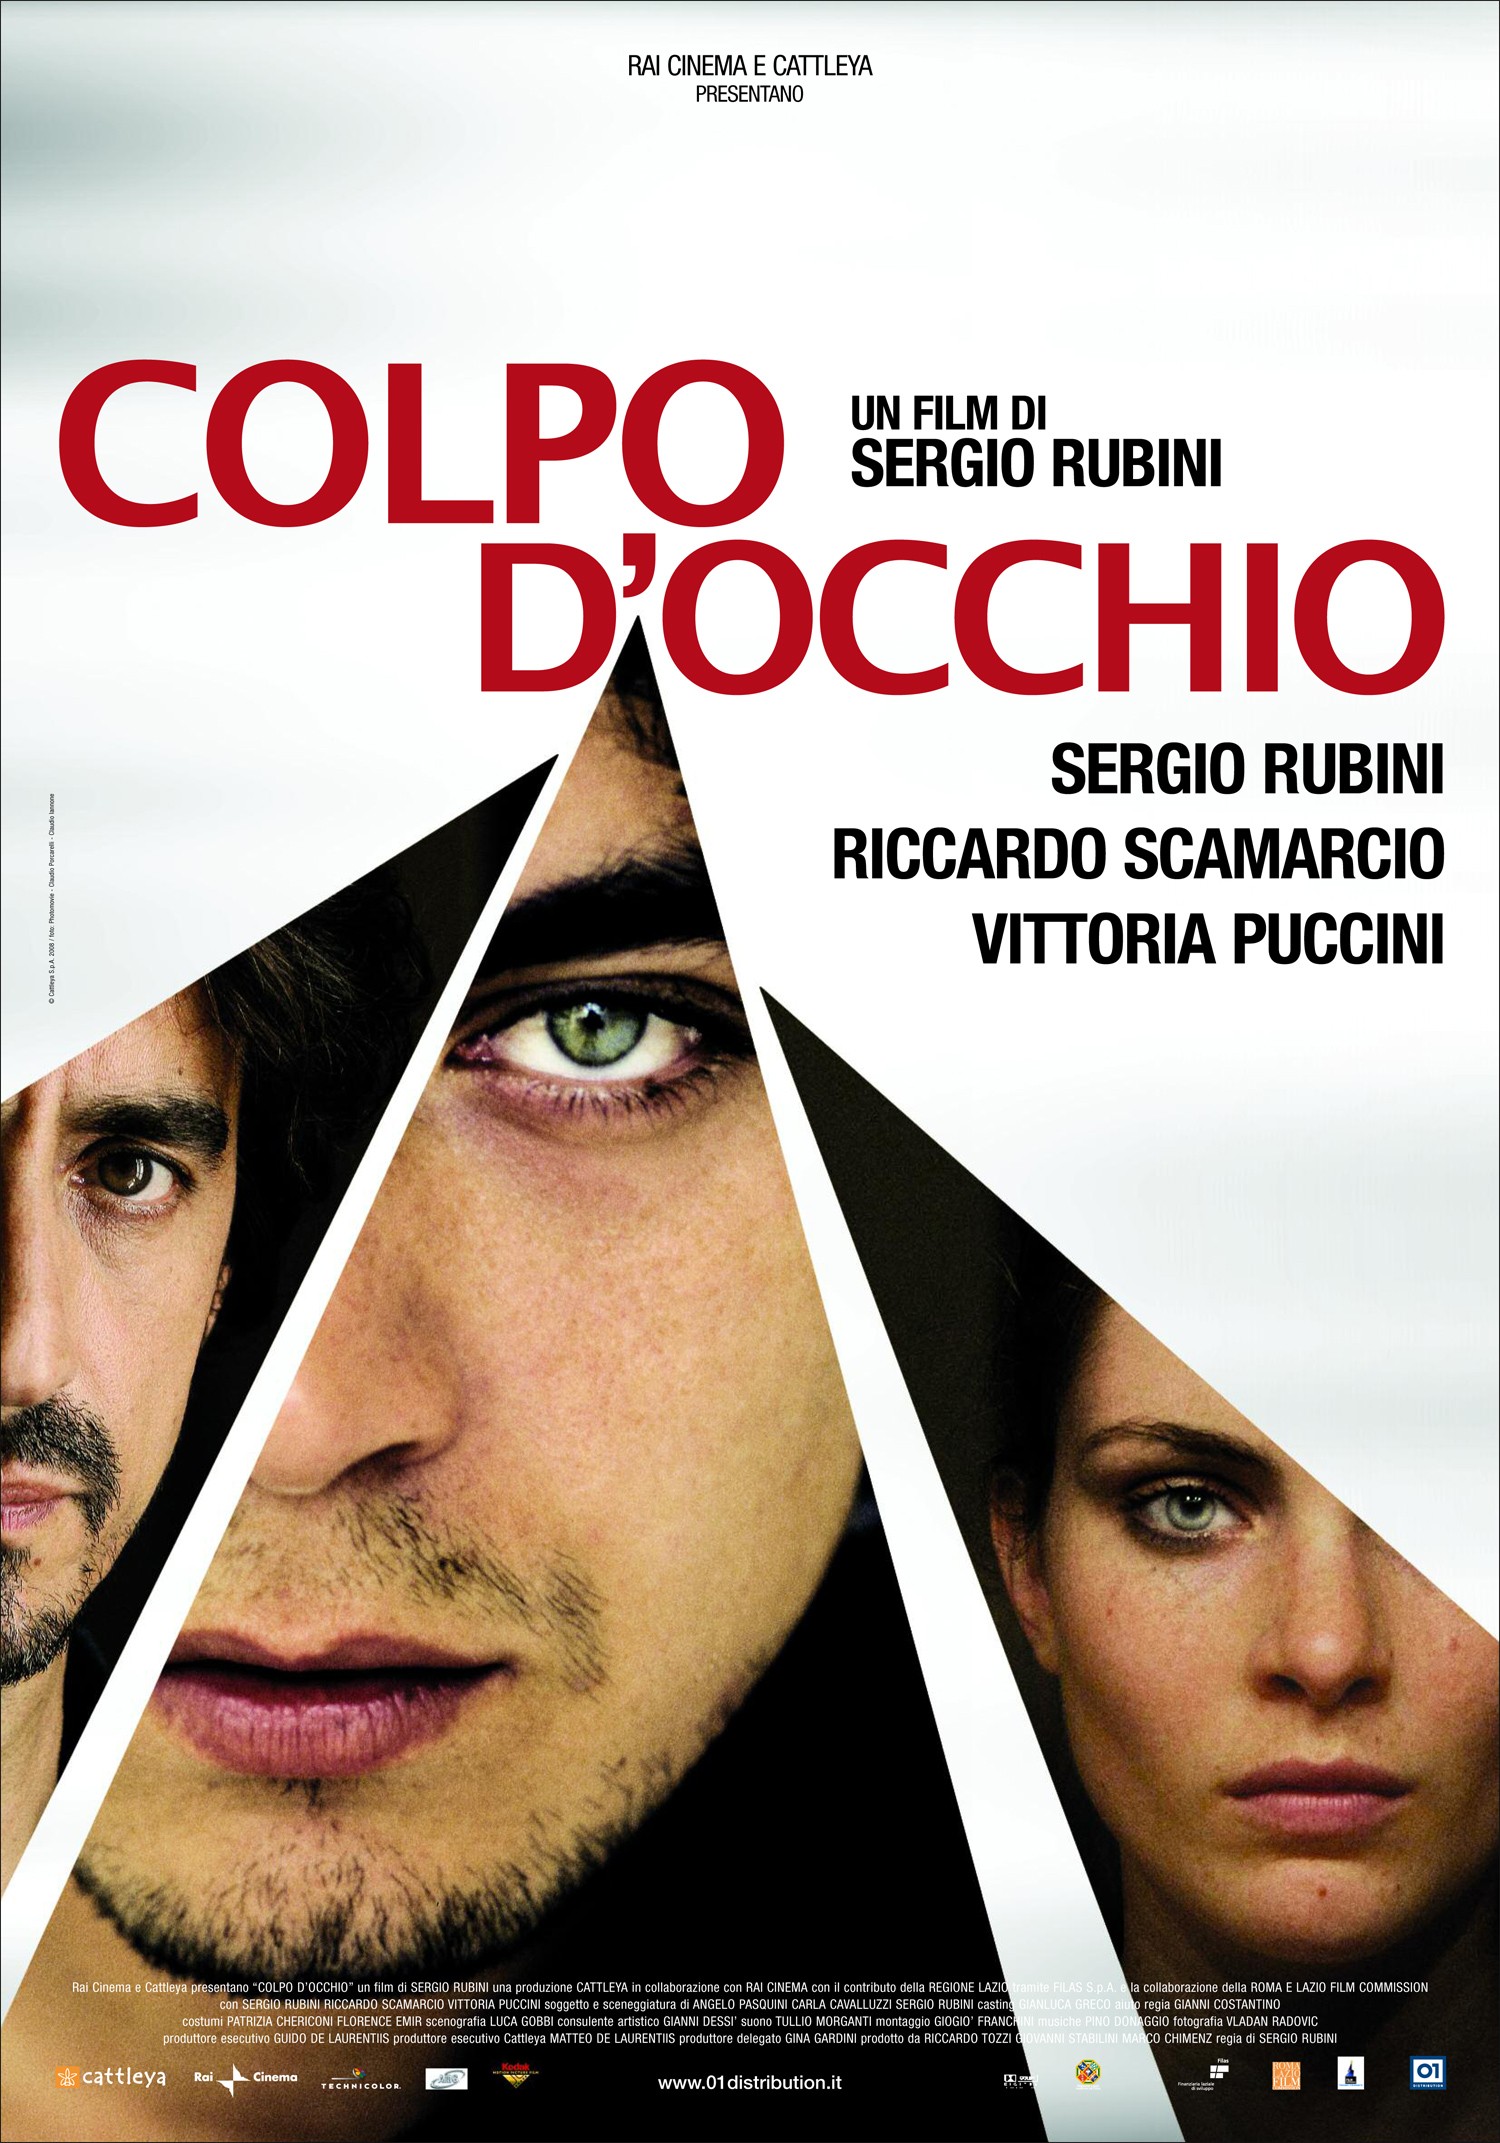 Mega Sized Movie Poster Image for Colpo d'occhio 